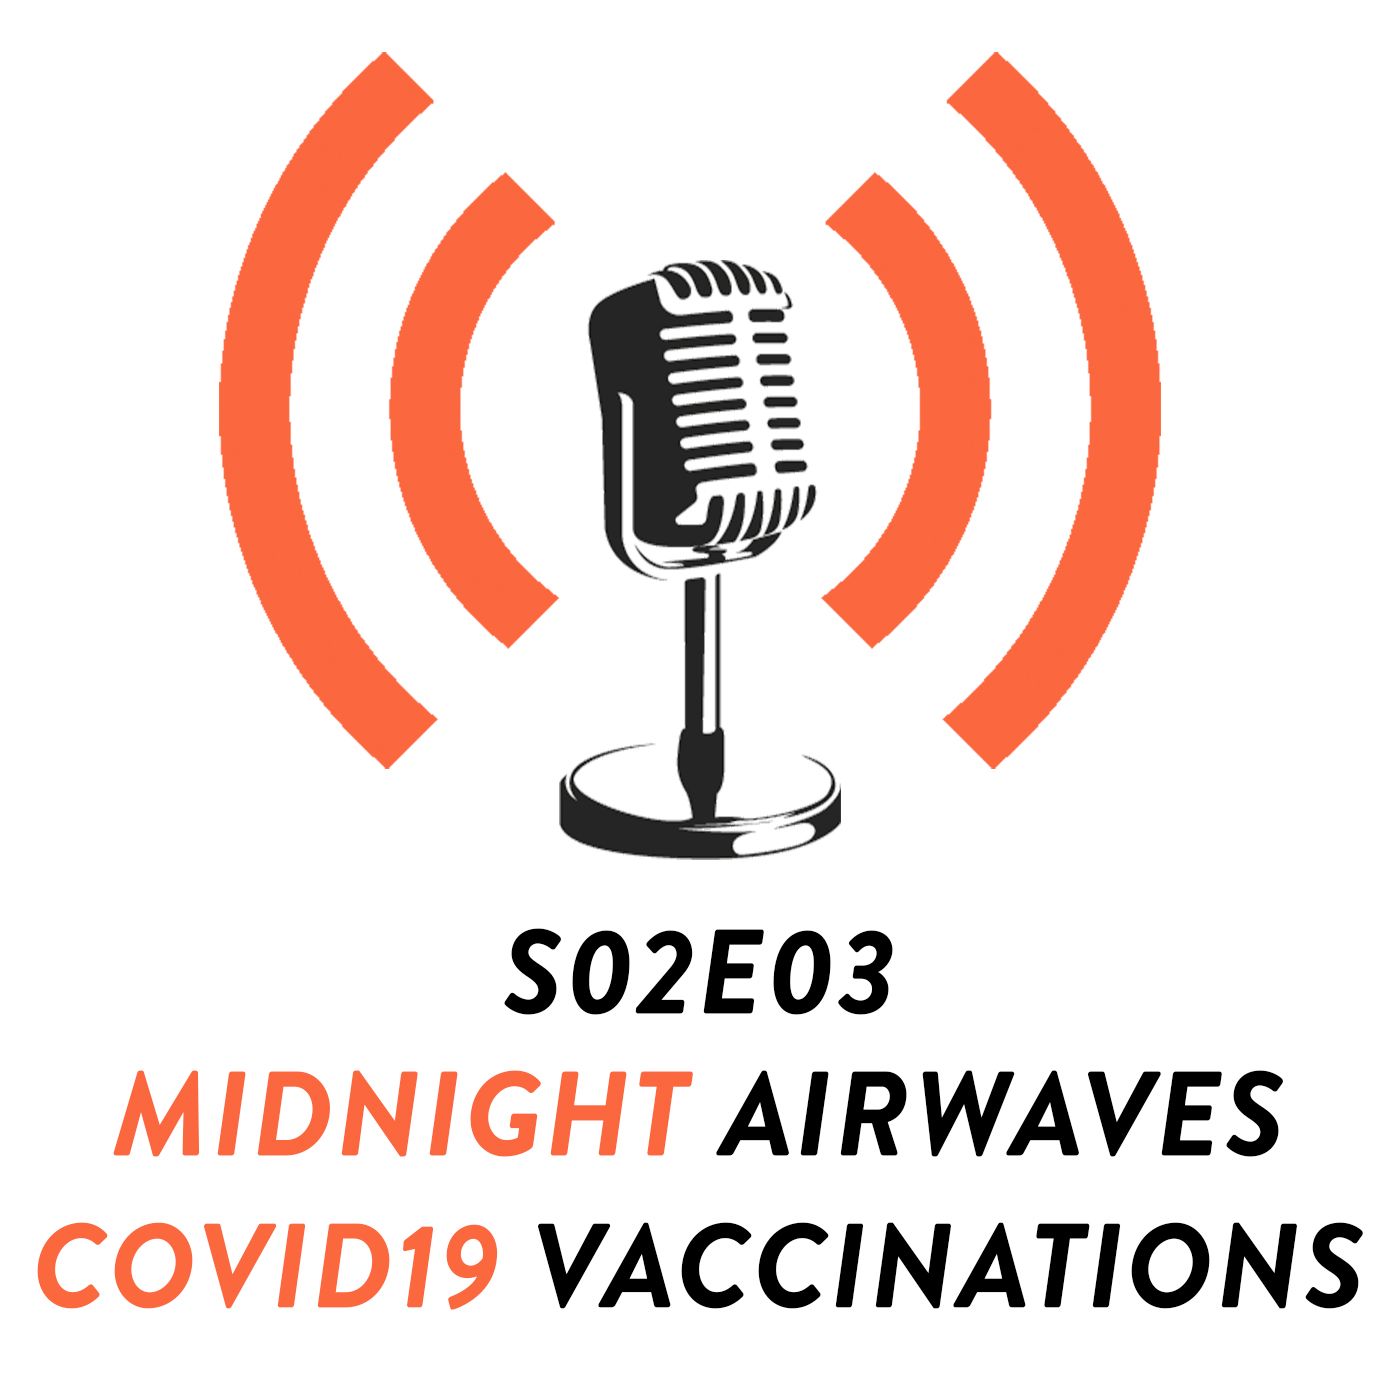 S02E03 - To Vaccinate, or Not?